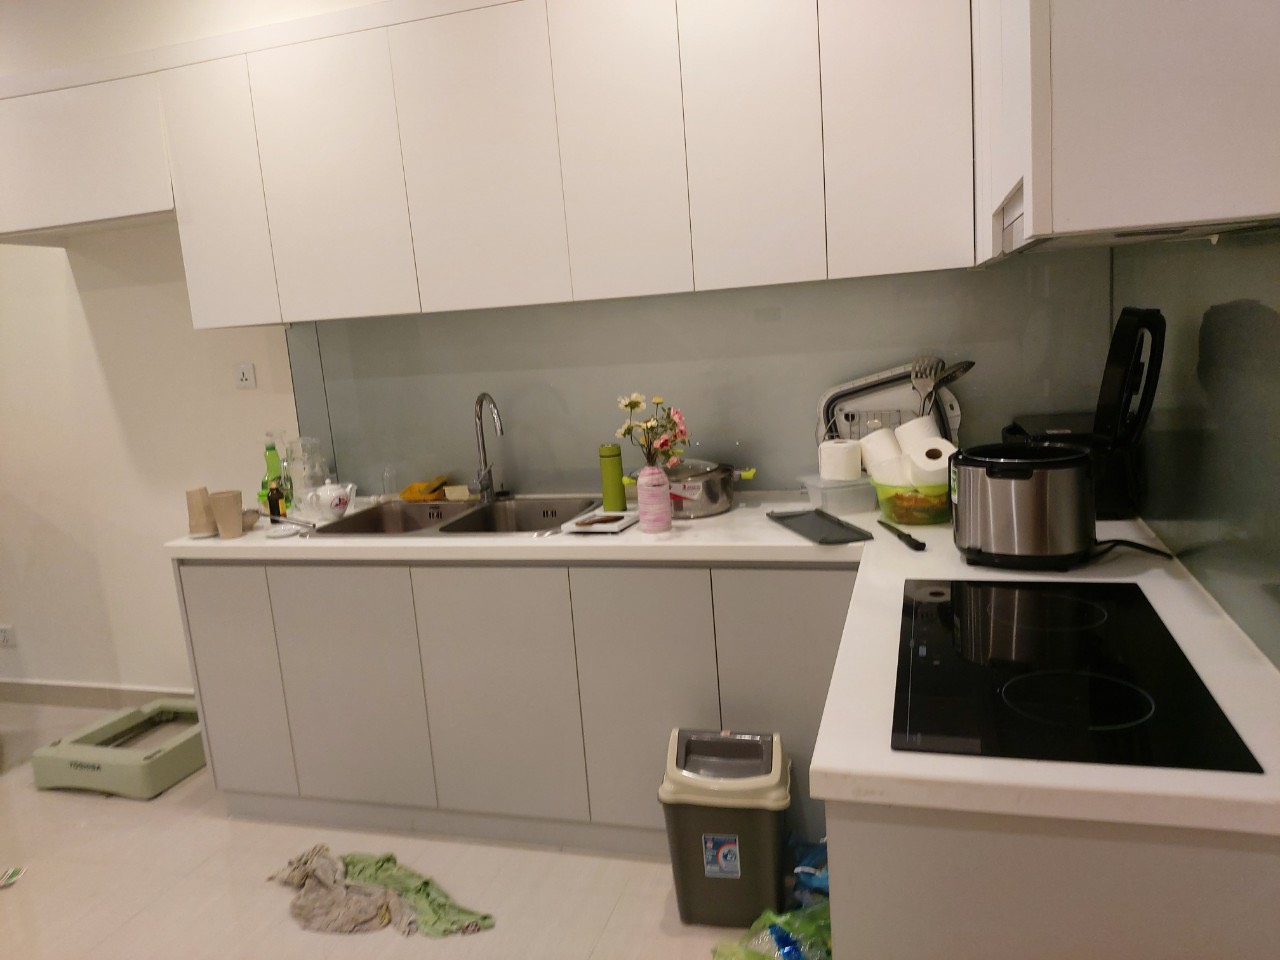 Serviced Apartment For Rent in Vinhomes Ocean Park S2.01 2 Bedrooms 55M2